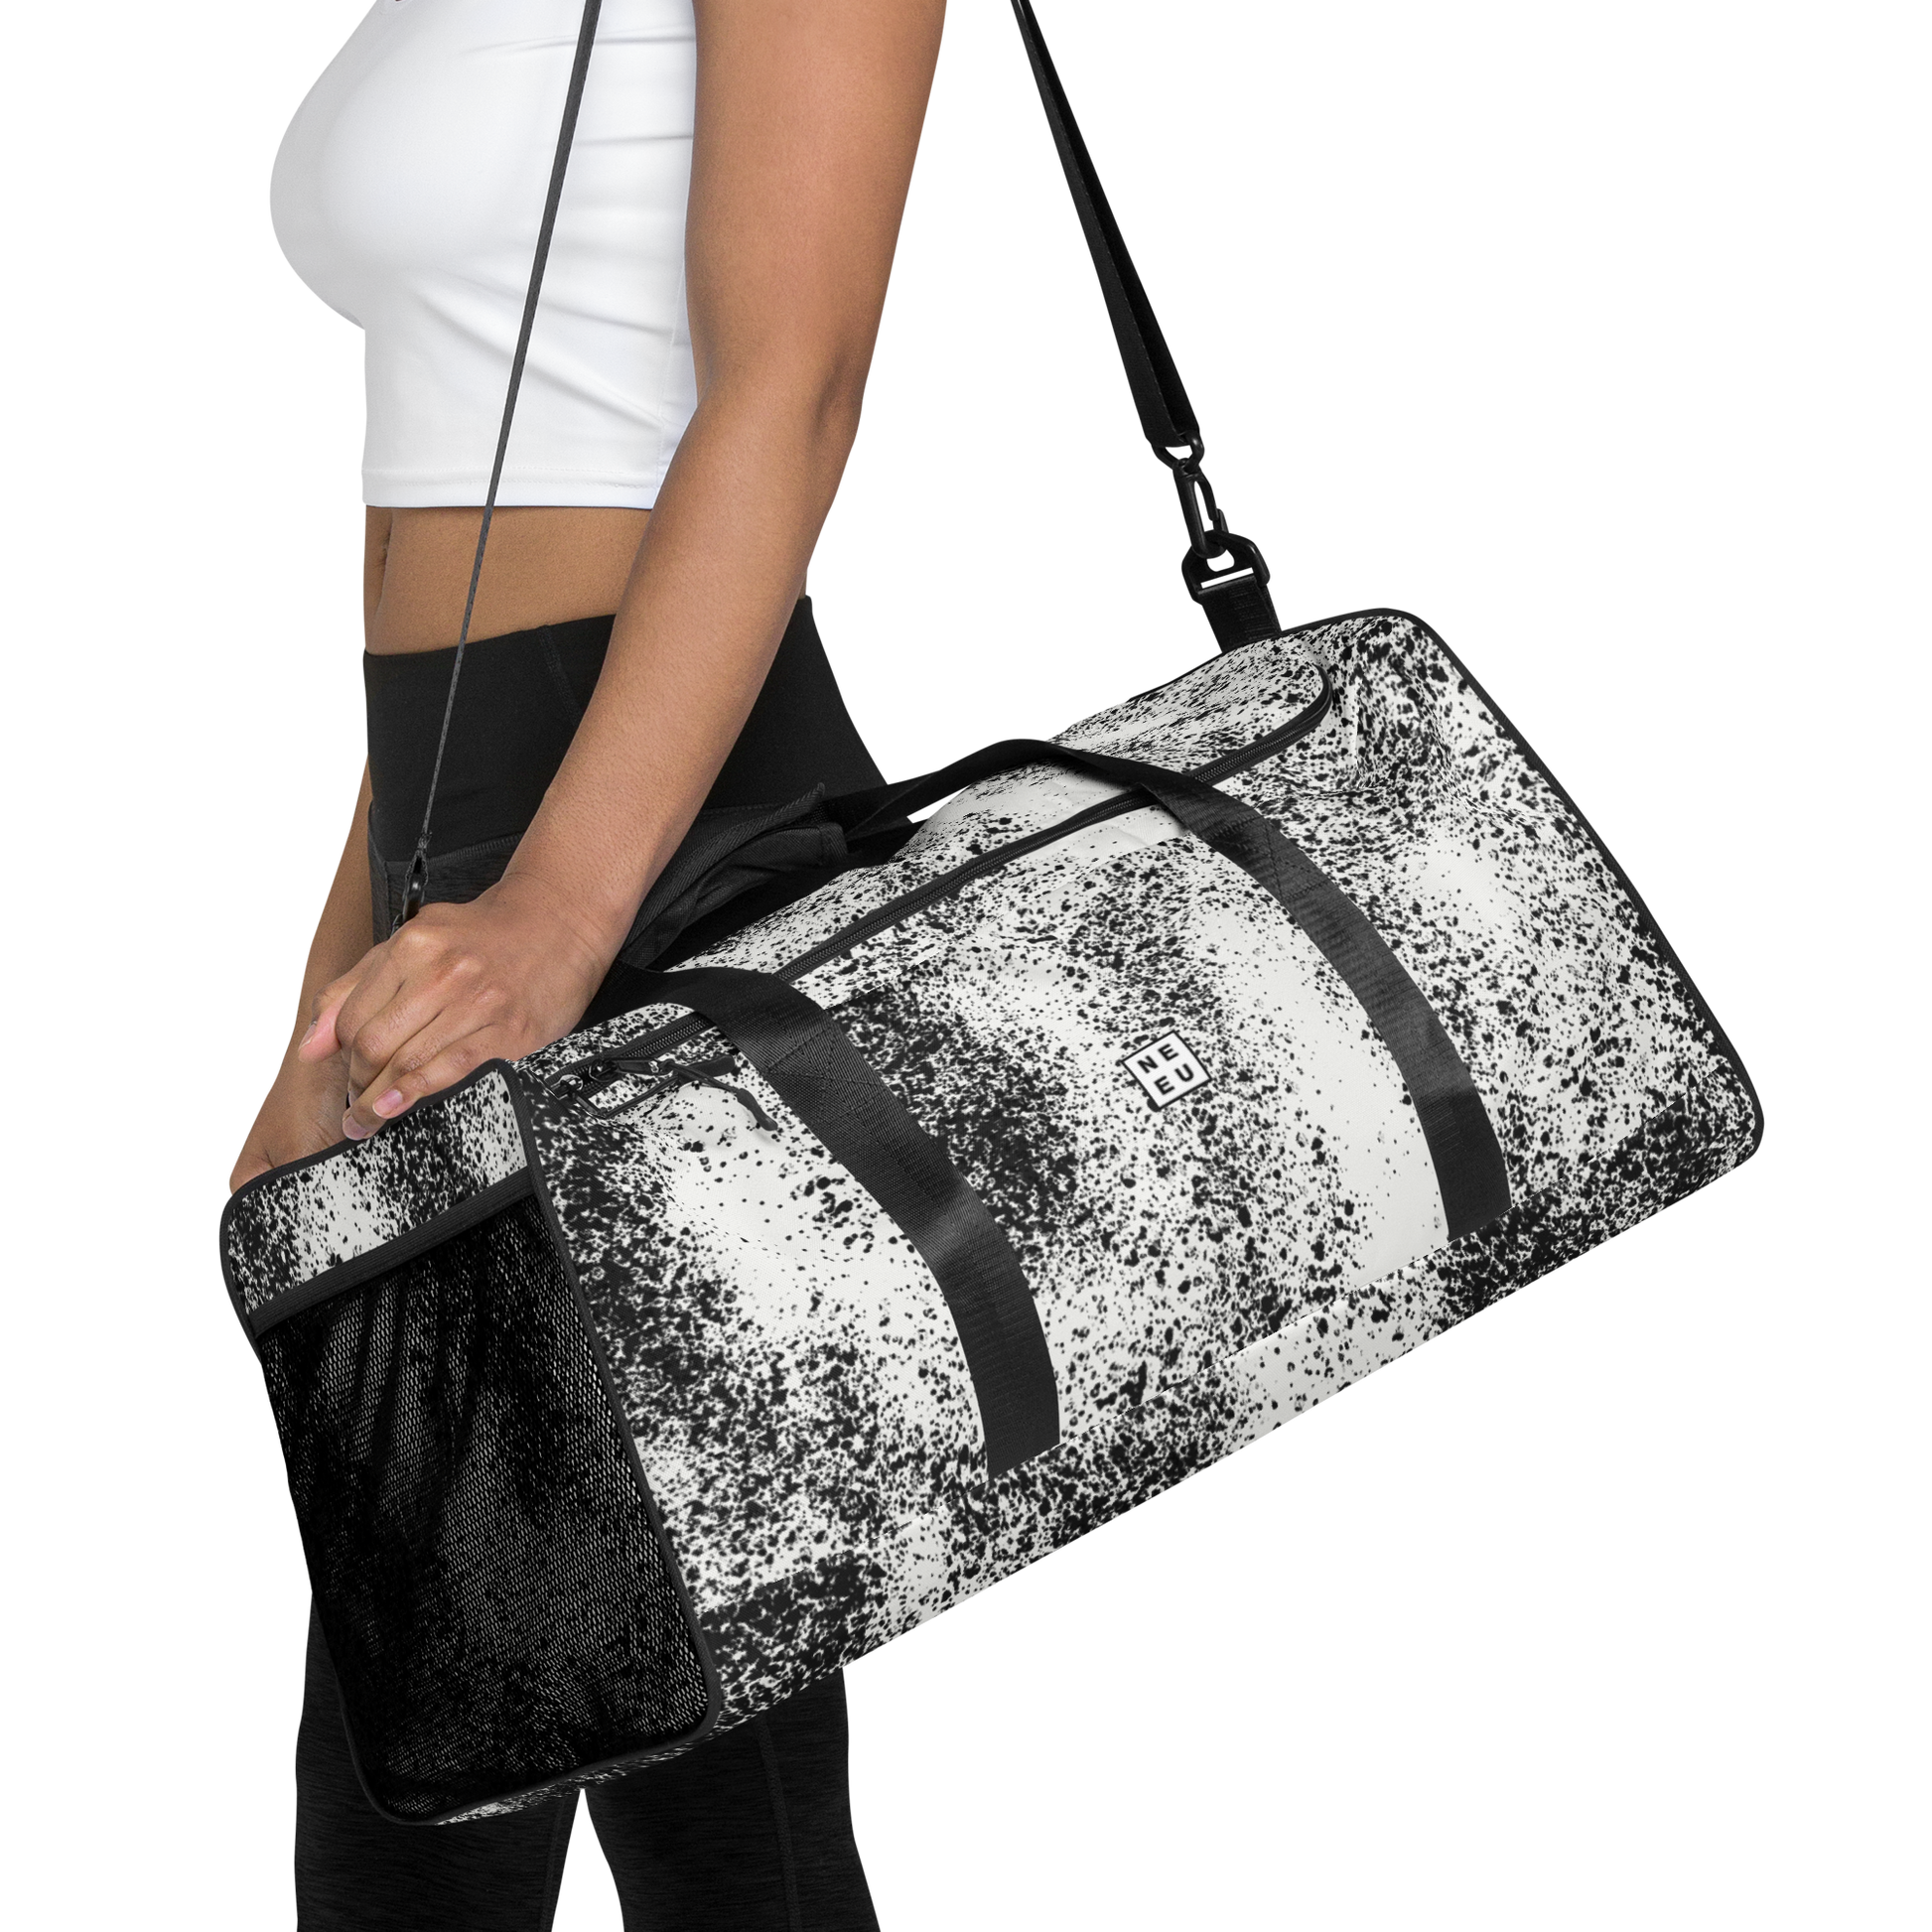 Woman in white top and black leggings carries New City Adventure duffle bag in black and white speckle pattern front view